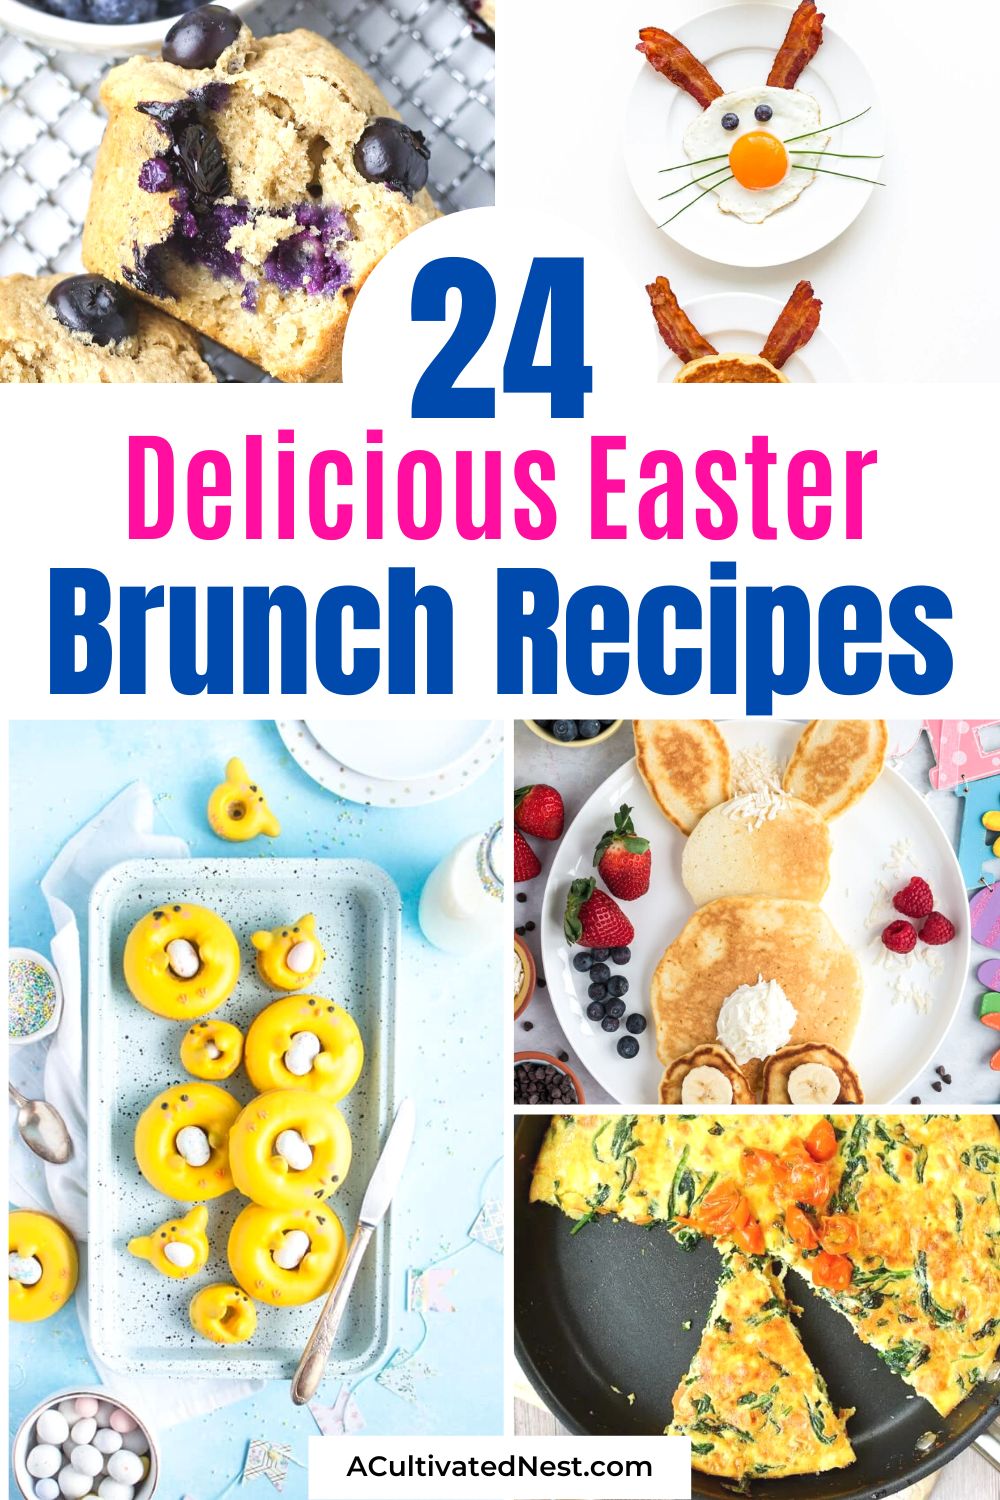 24 Delicious Easter Brunch Recipes- Whether you're hosting a big family gathering or simply looking for some fresh meal inspiration, these Easter brunch recipes are sure to impress. From classic favorites to creative new twists, you'll find plenty of tasty options to choose from! | Easter-themed recipes, Easter breakfast ideas, Easter recipes for kids, #Easter #brunchRecipes #EasterBreakfast #breakfastRecipes #ACultivatedNest